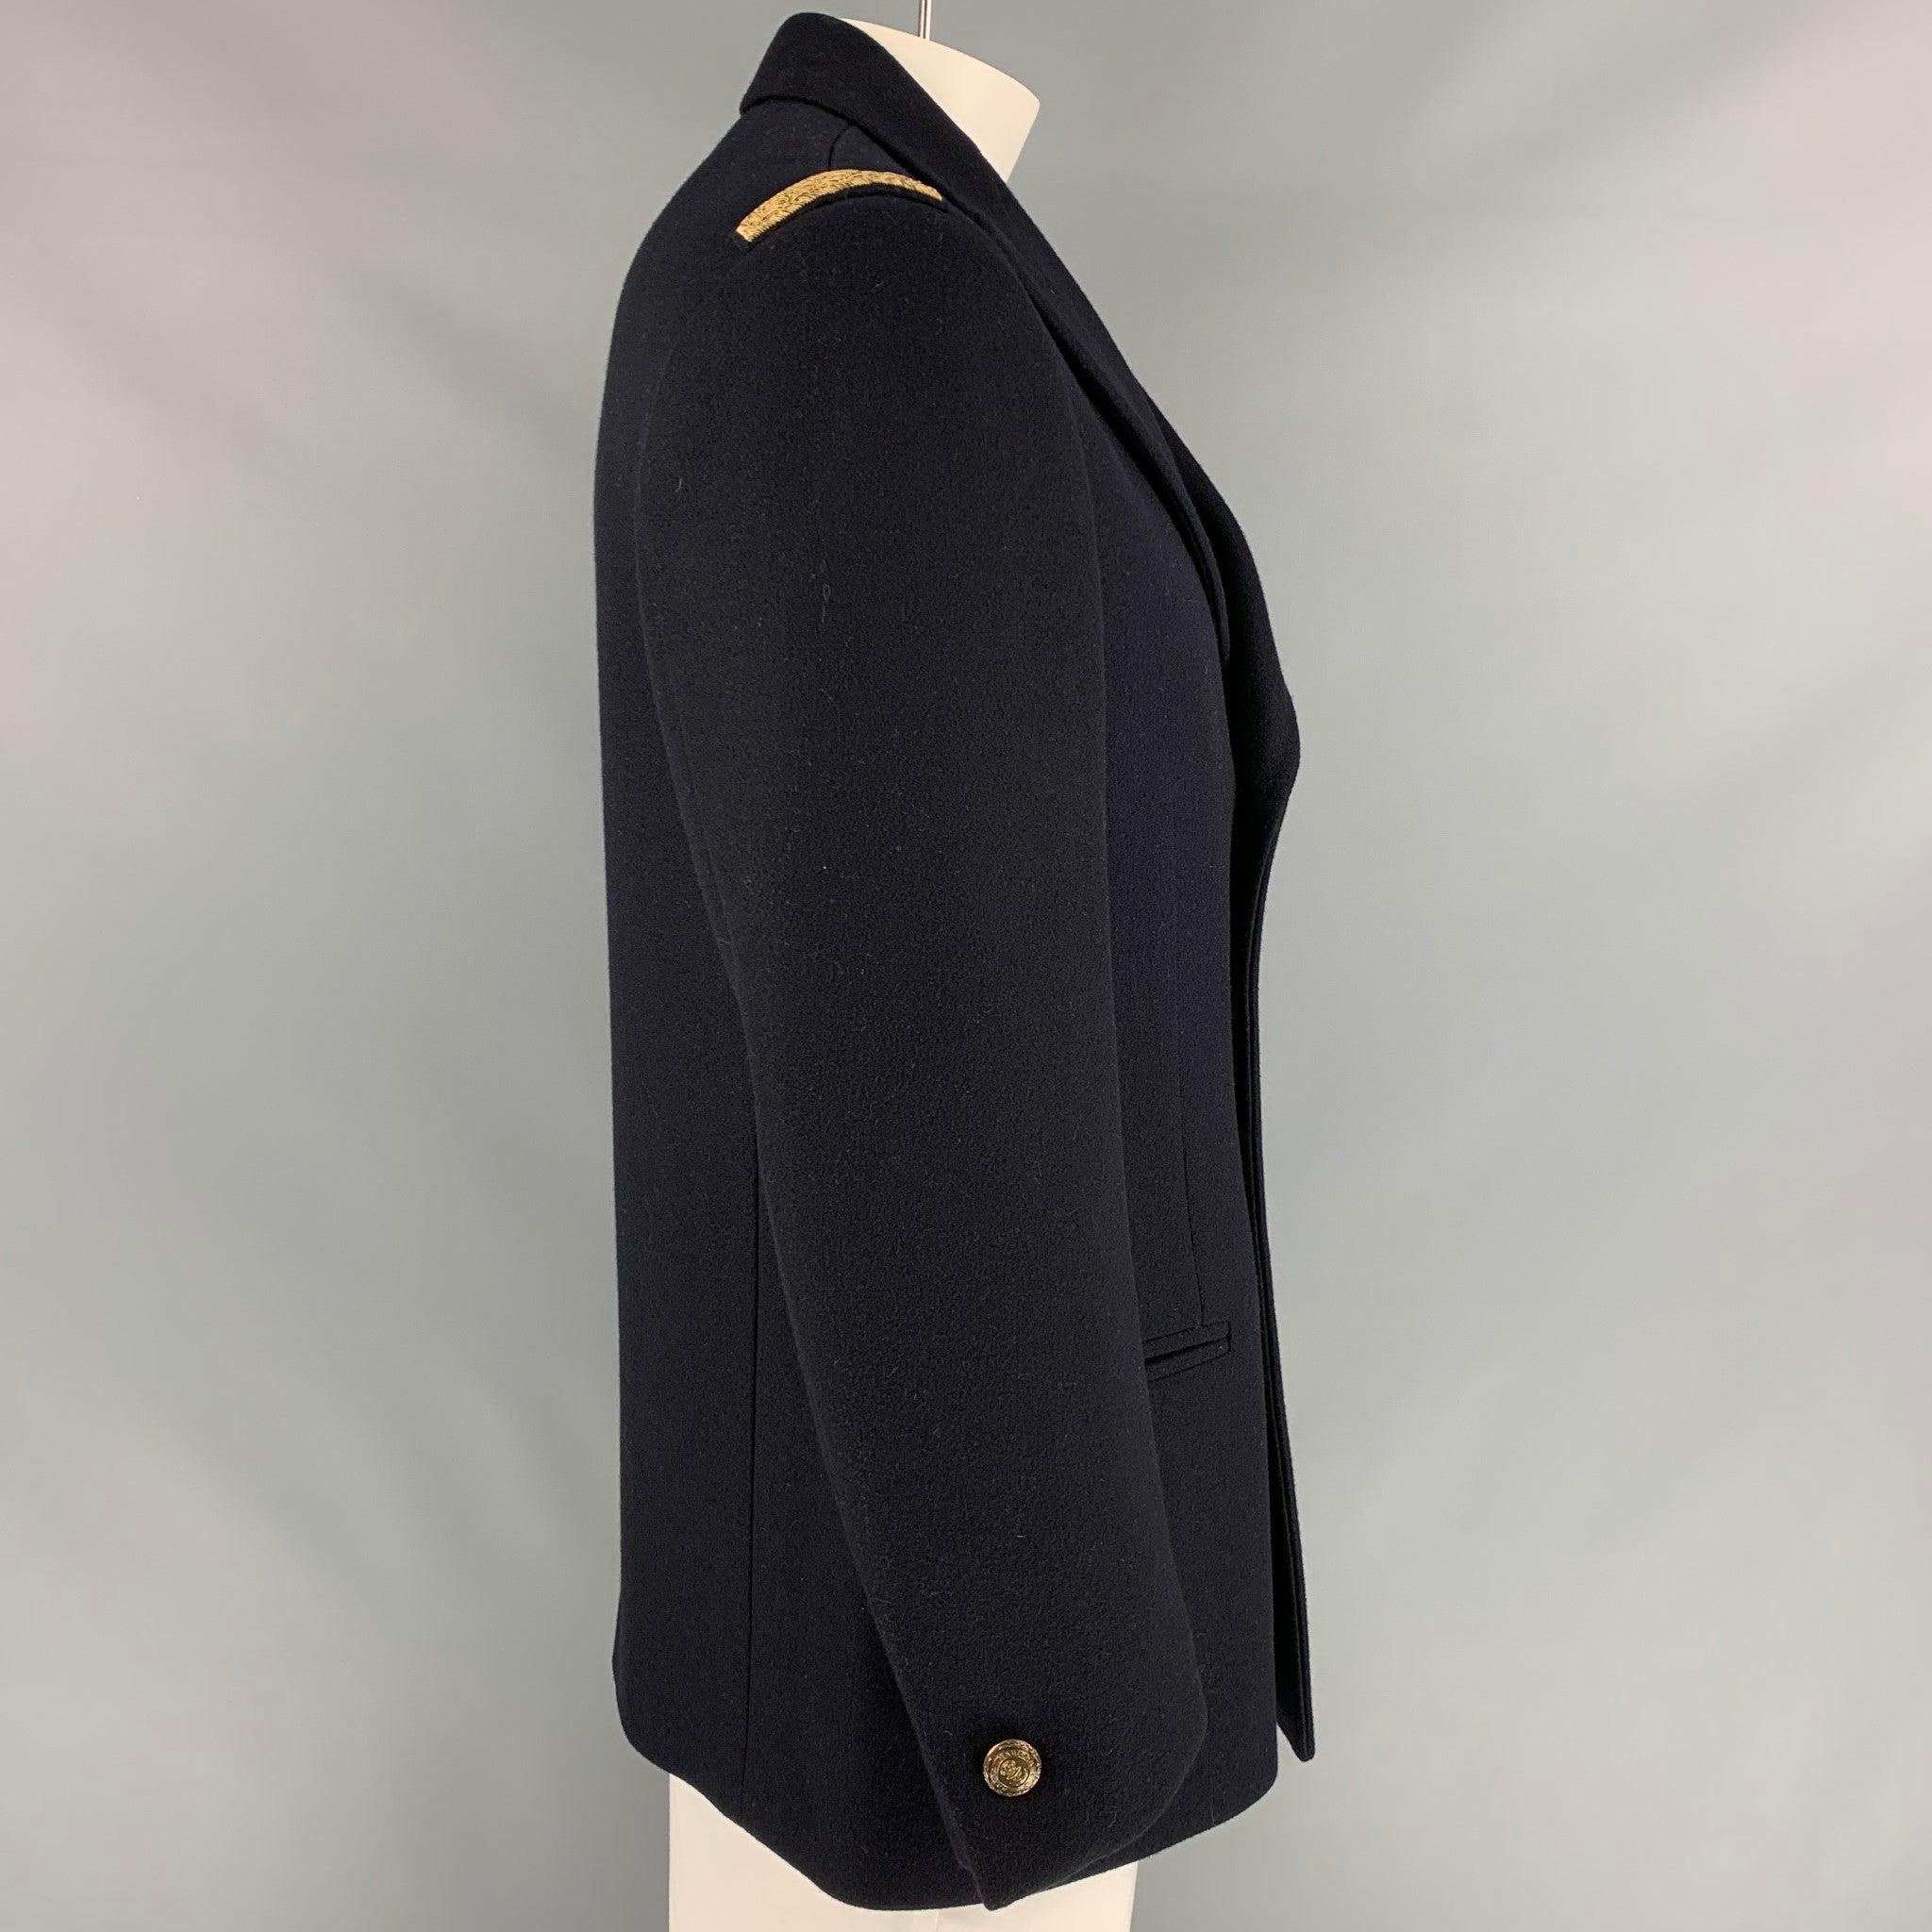 RALPH LAUREN PURPLE LABEL Size 42 Black Gold Wool/Cashmere Double Breasted Coat In Good Condition For Sale In San Francisco, CA